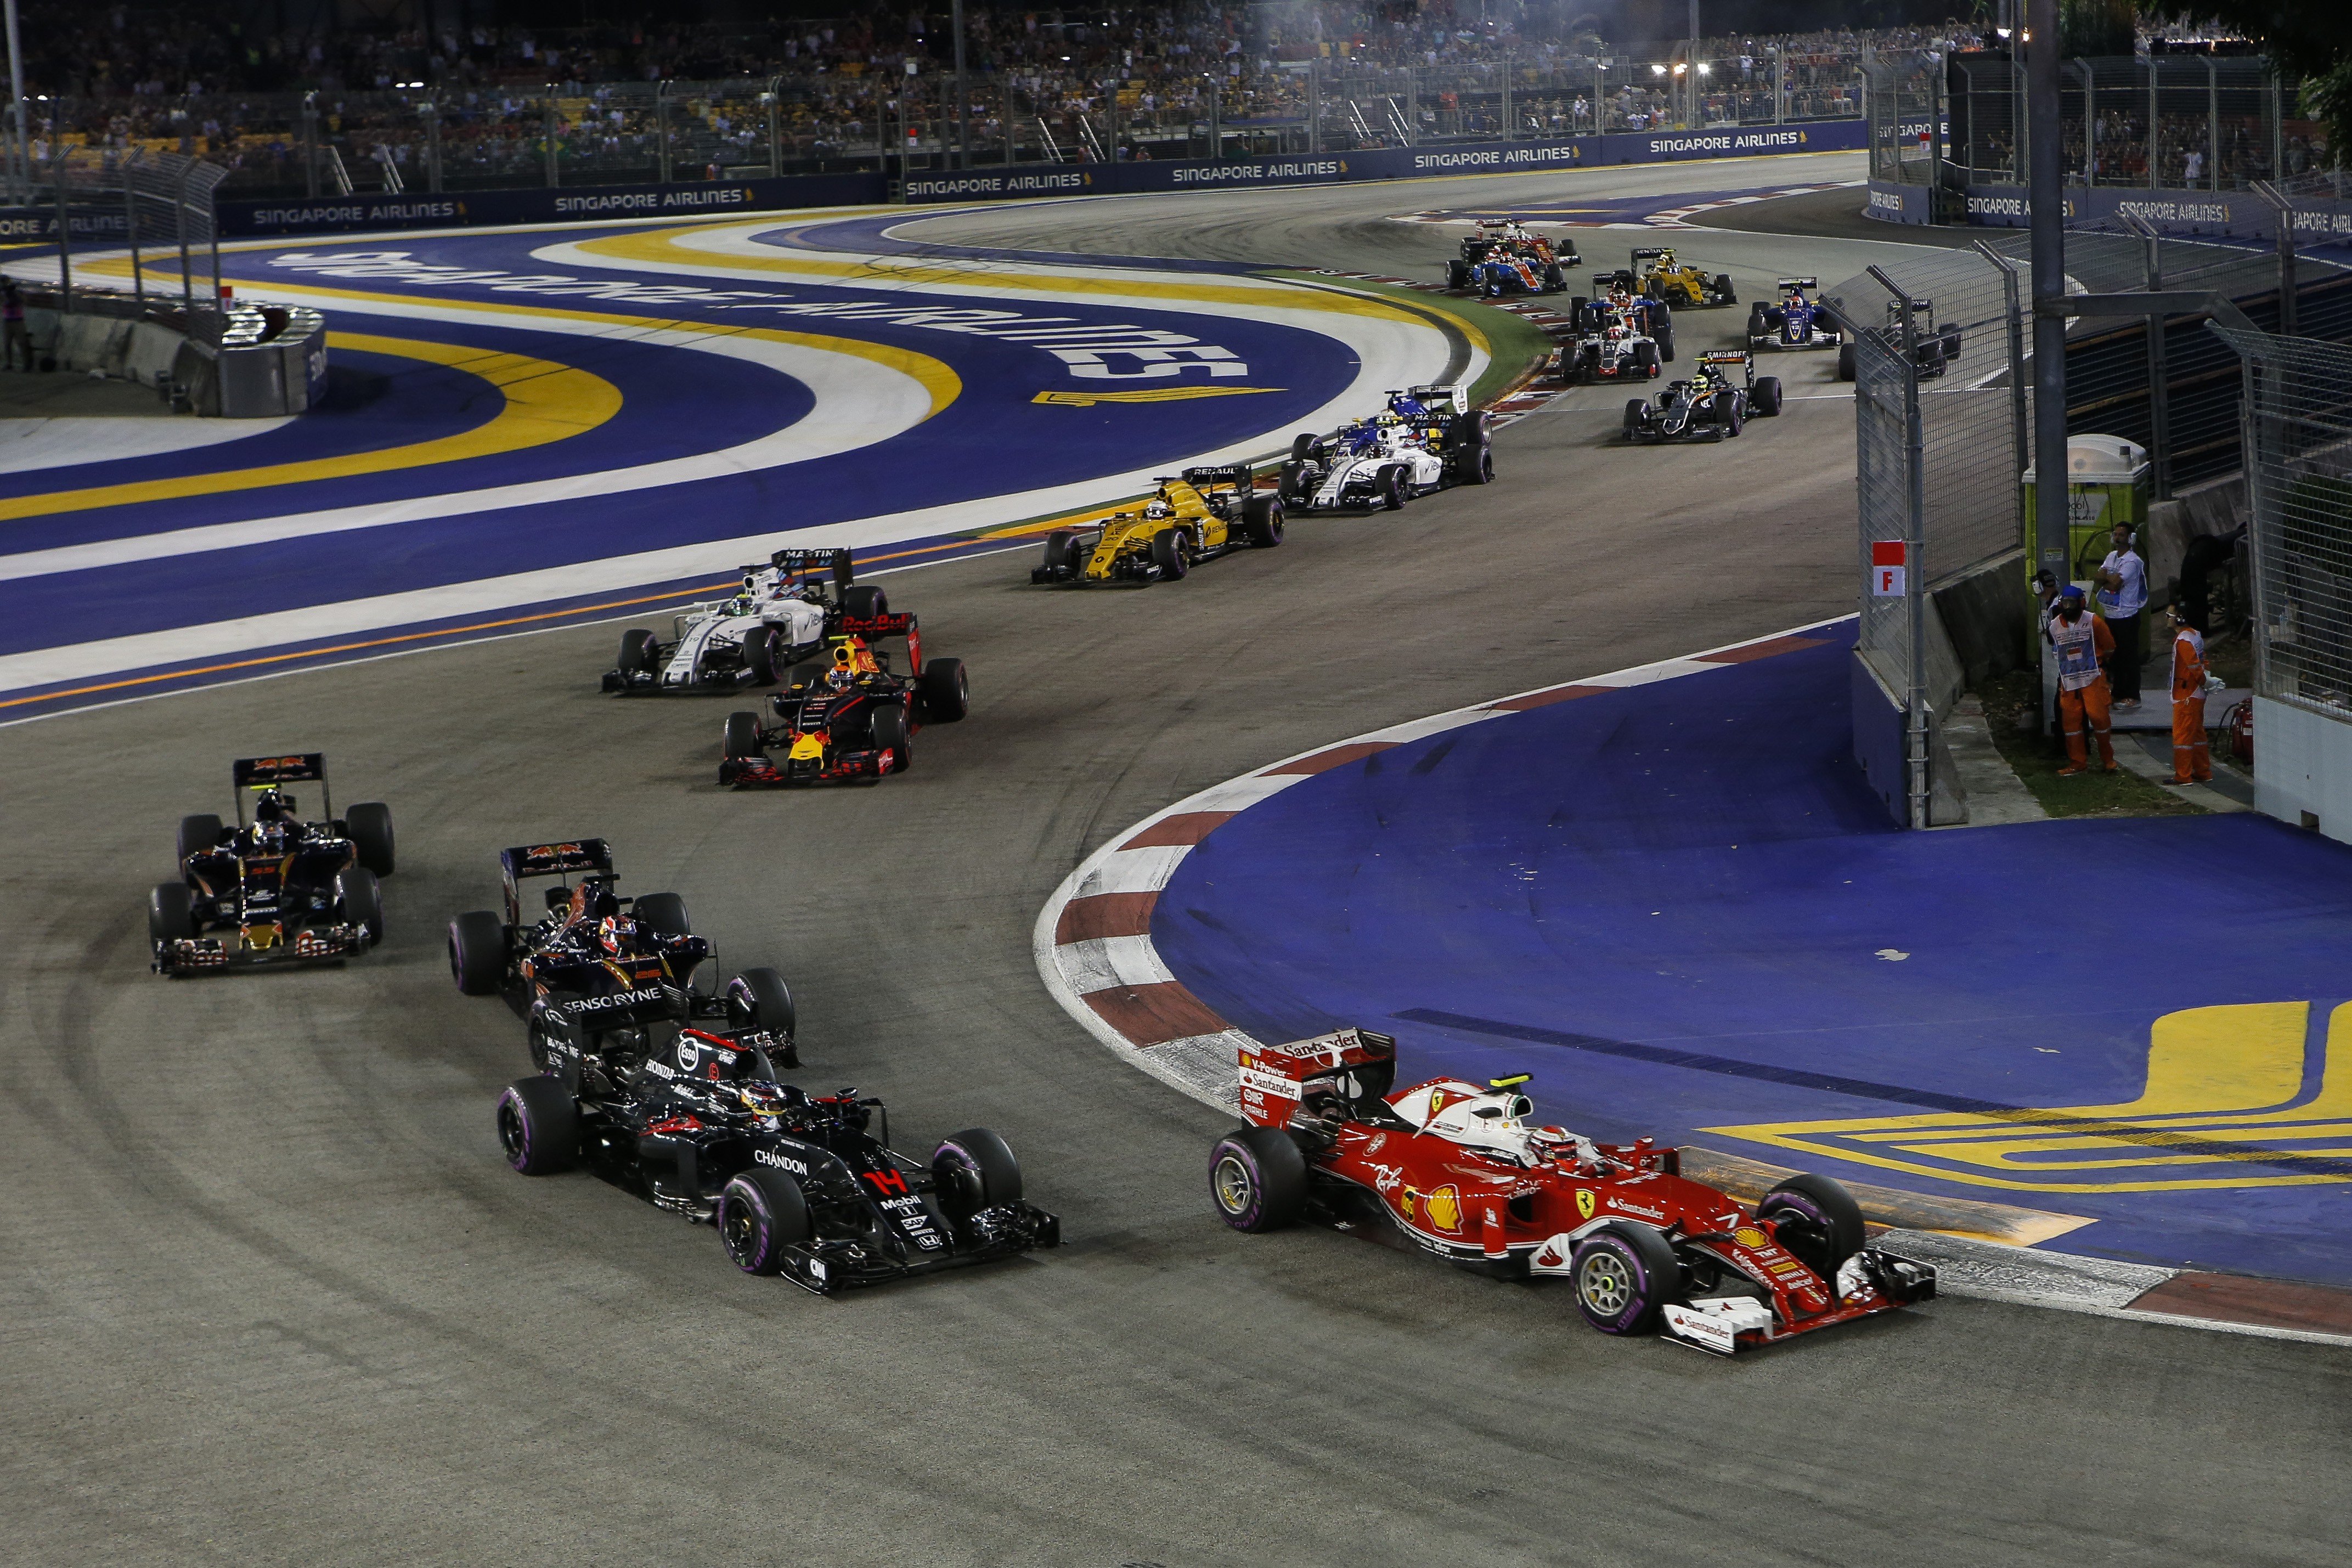 The Singapore Grand Prix on Marina Bay Street Circuit is one of the most exciting sporting events each year.